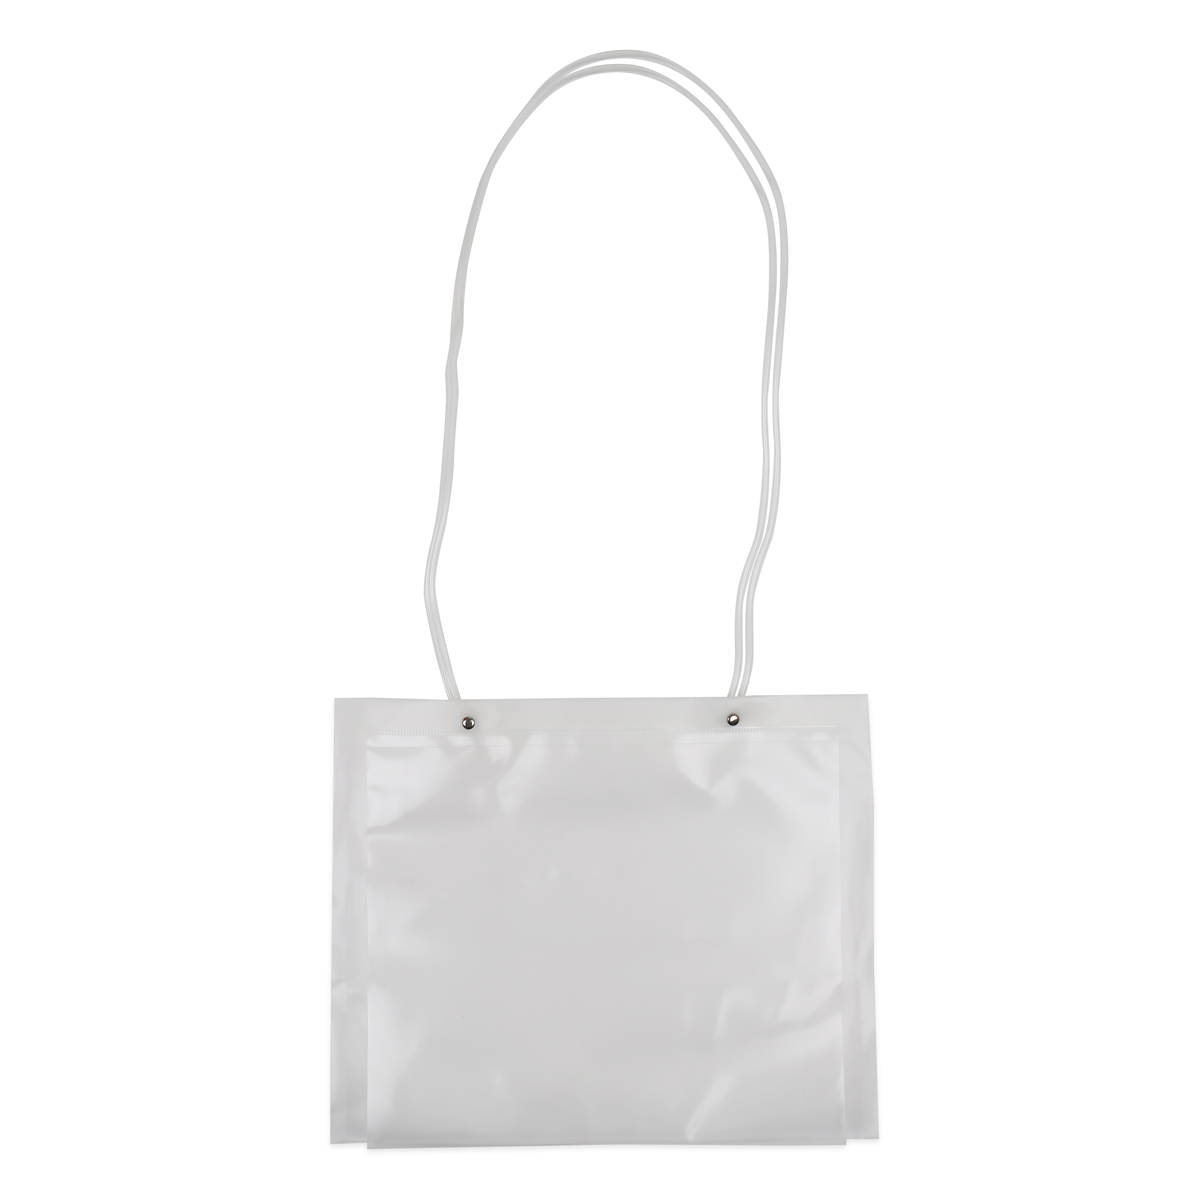 Luxury plastic shoulder bags with A4 insert window